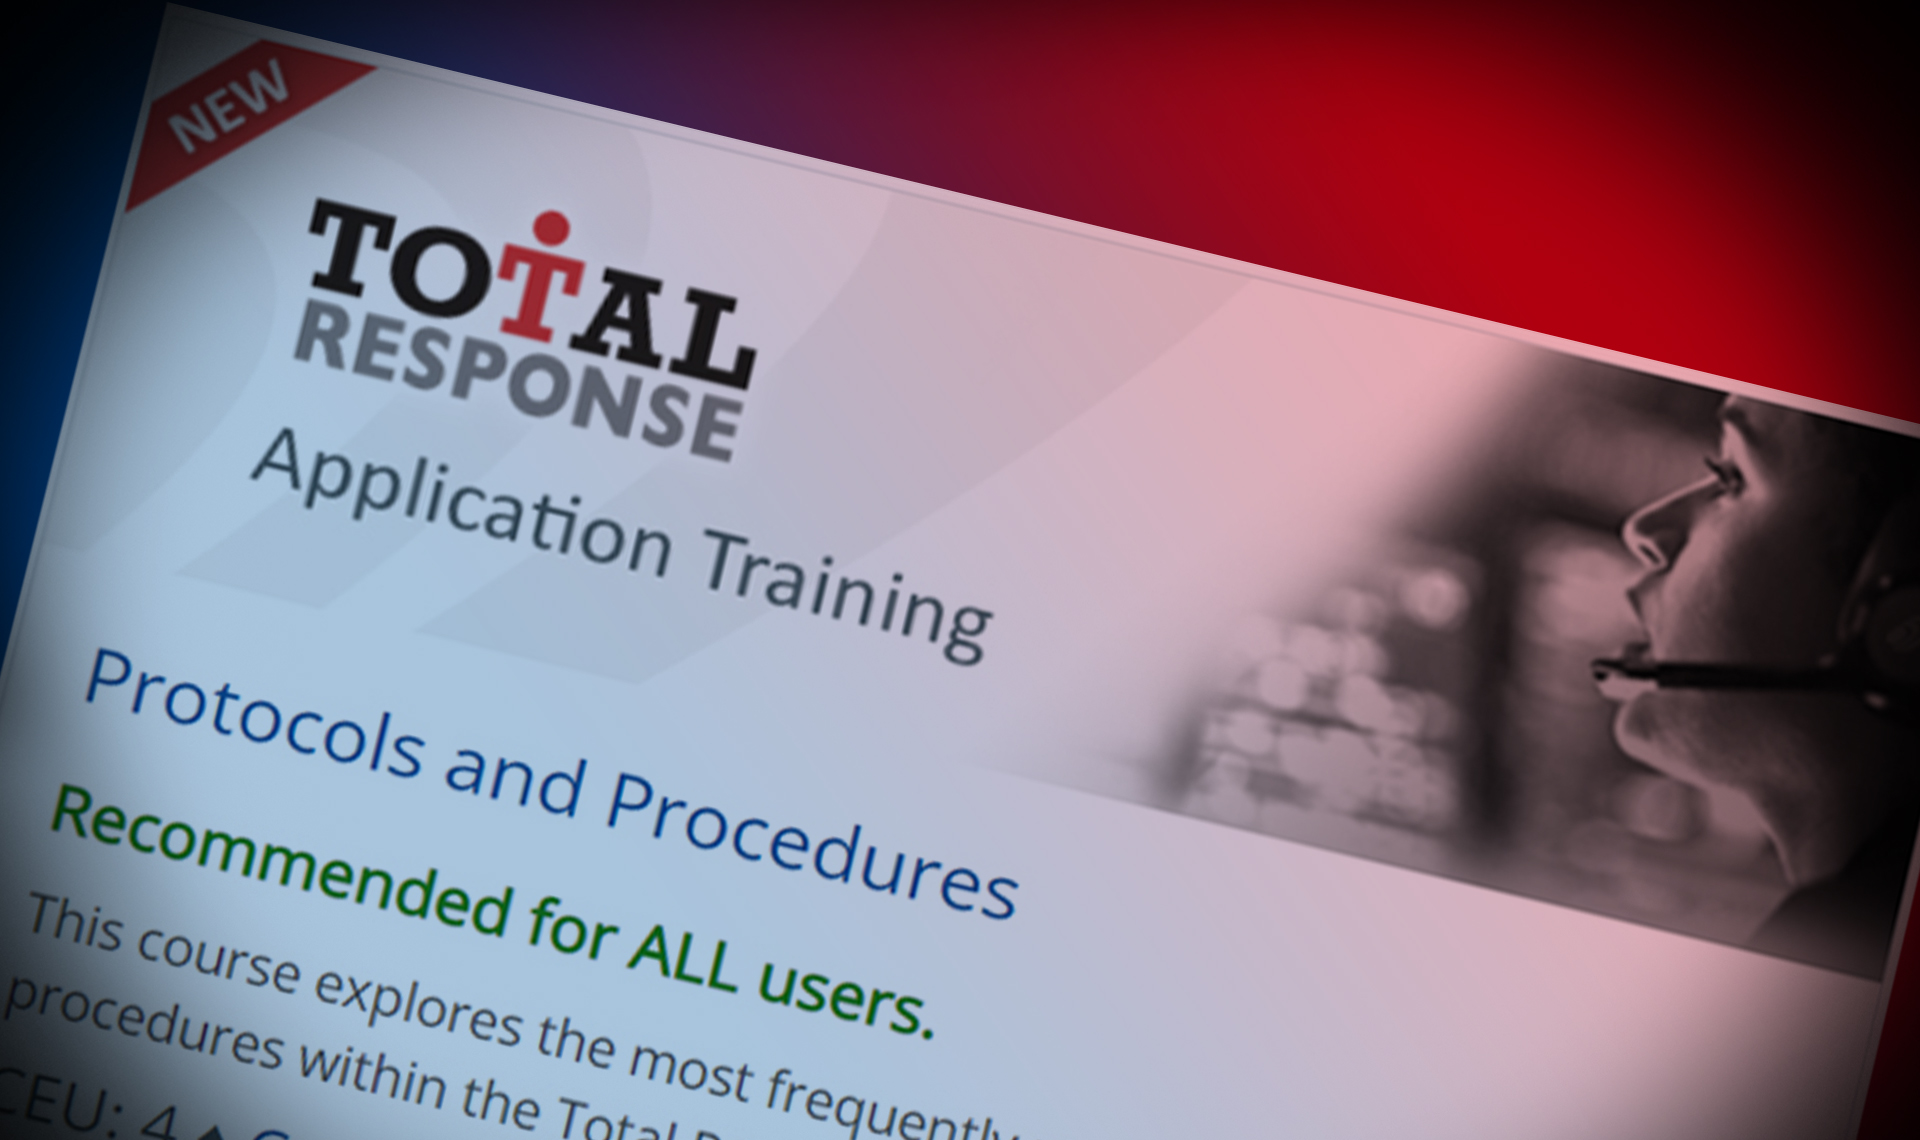 Introducing the Protocols and Procedures Course: The “Hows” and “Whys” of Total Response